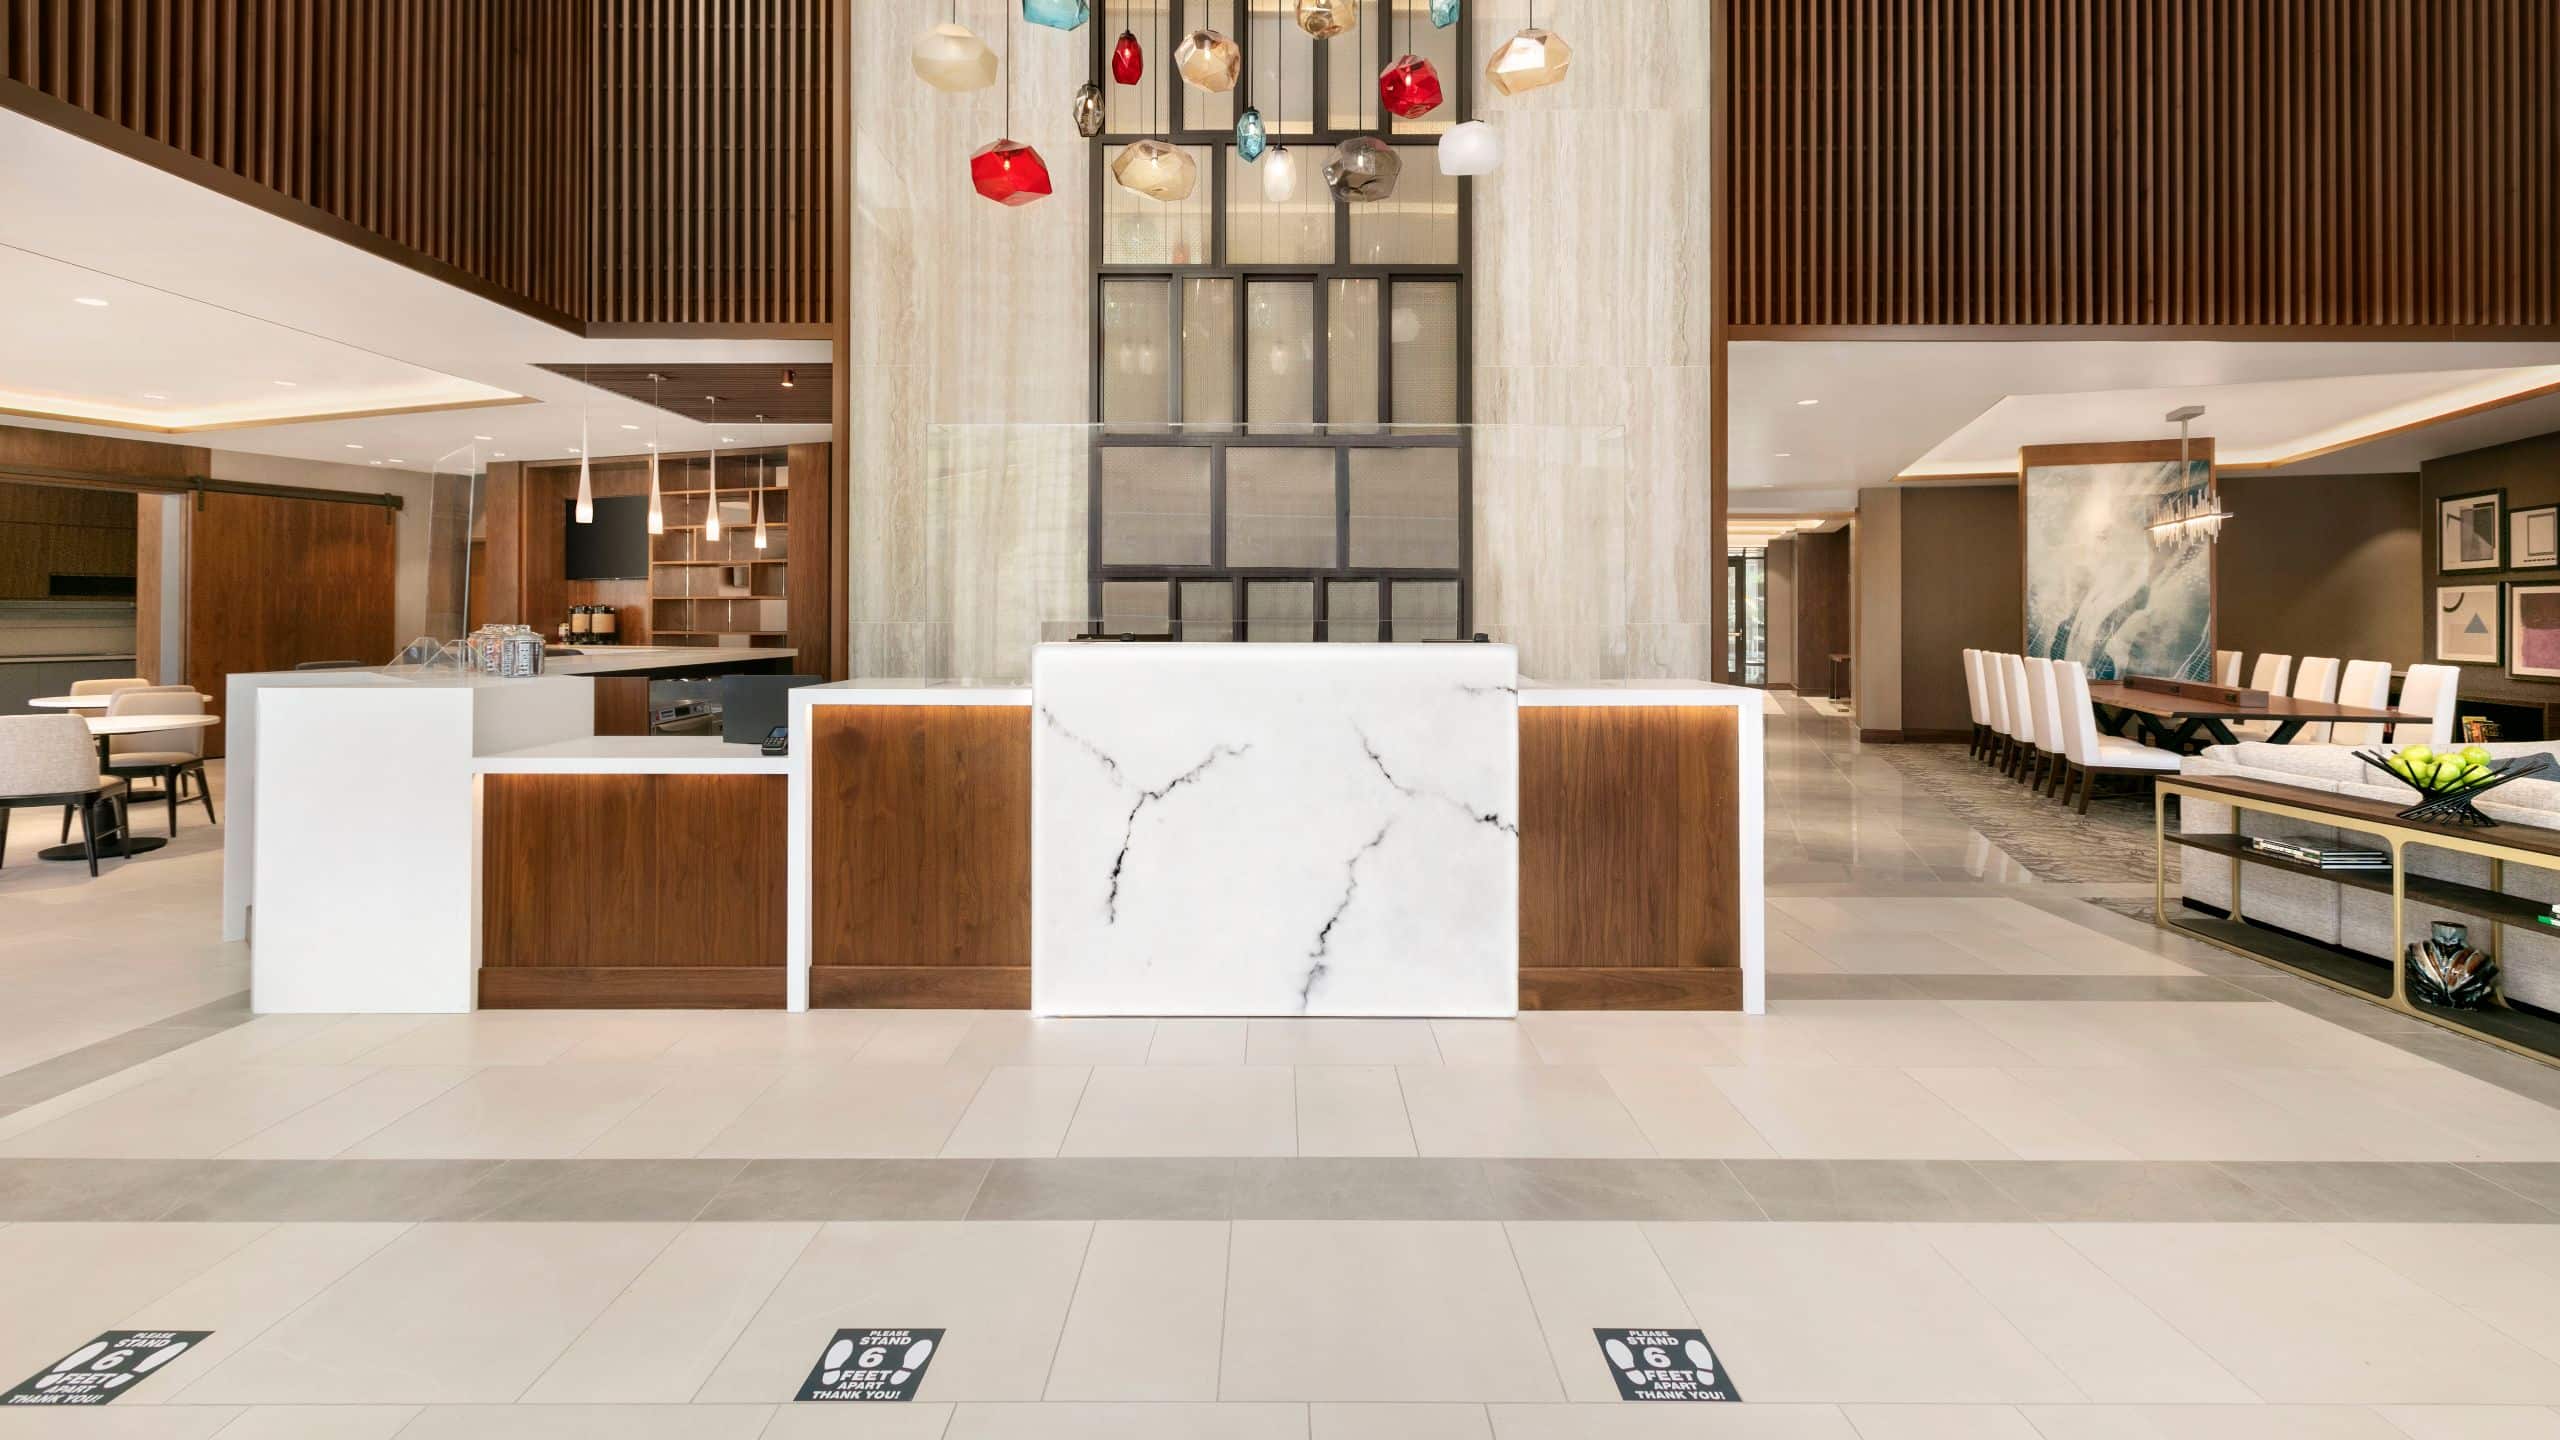 Top Fort Lee Accommodations with Hyatt | Hotels in Fort Lee, NJ